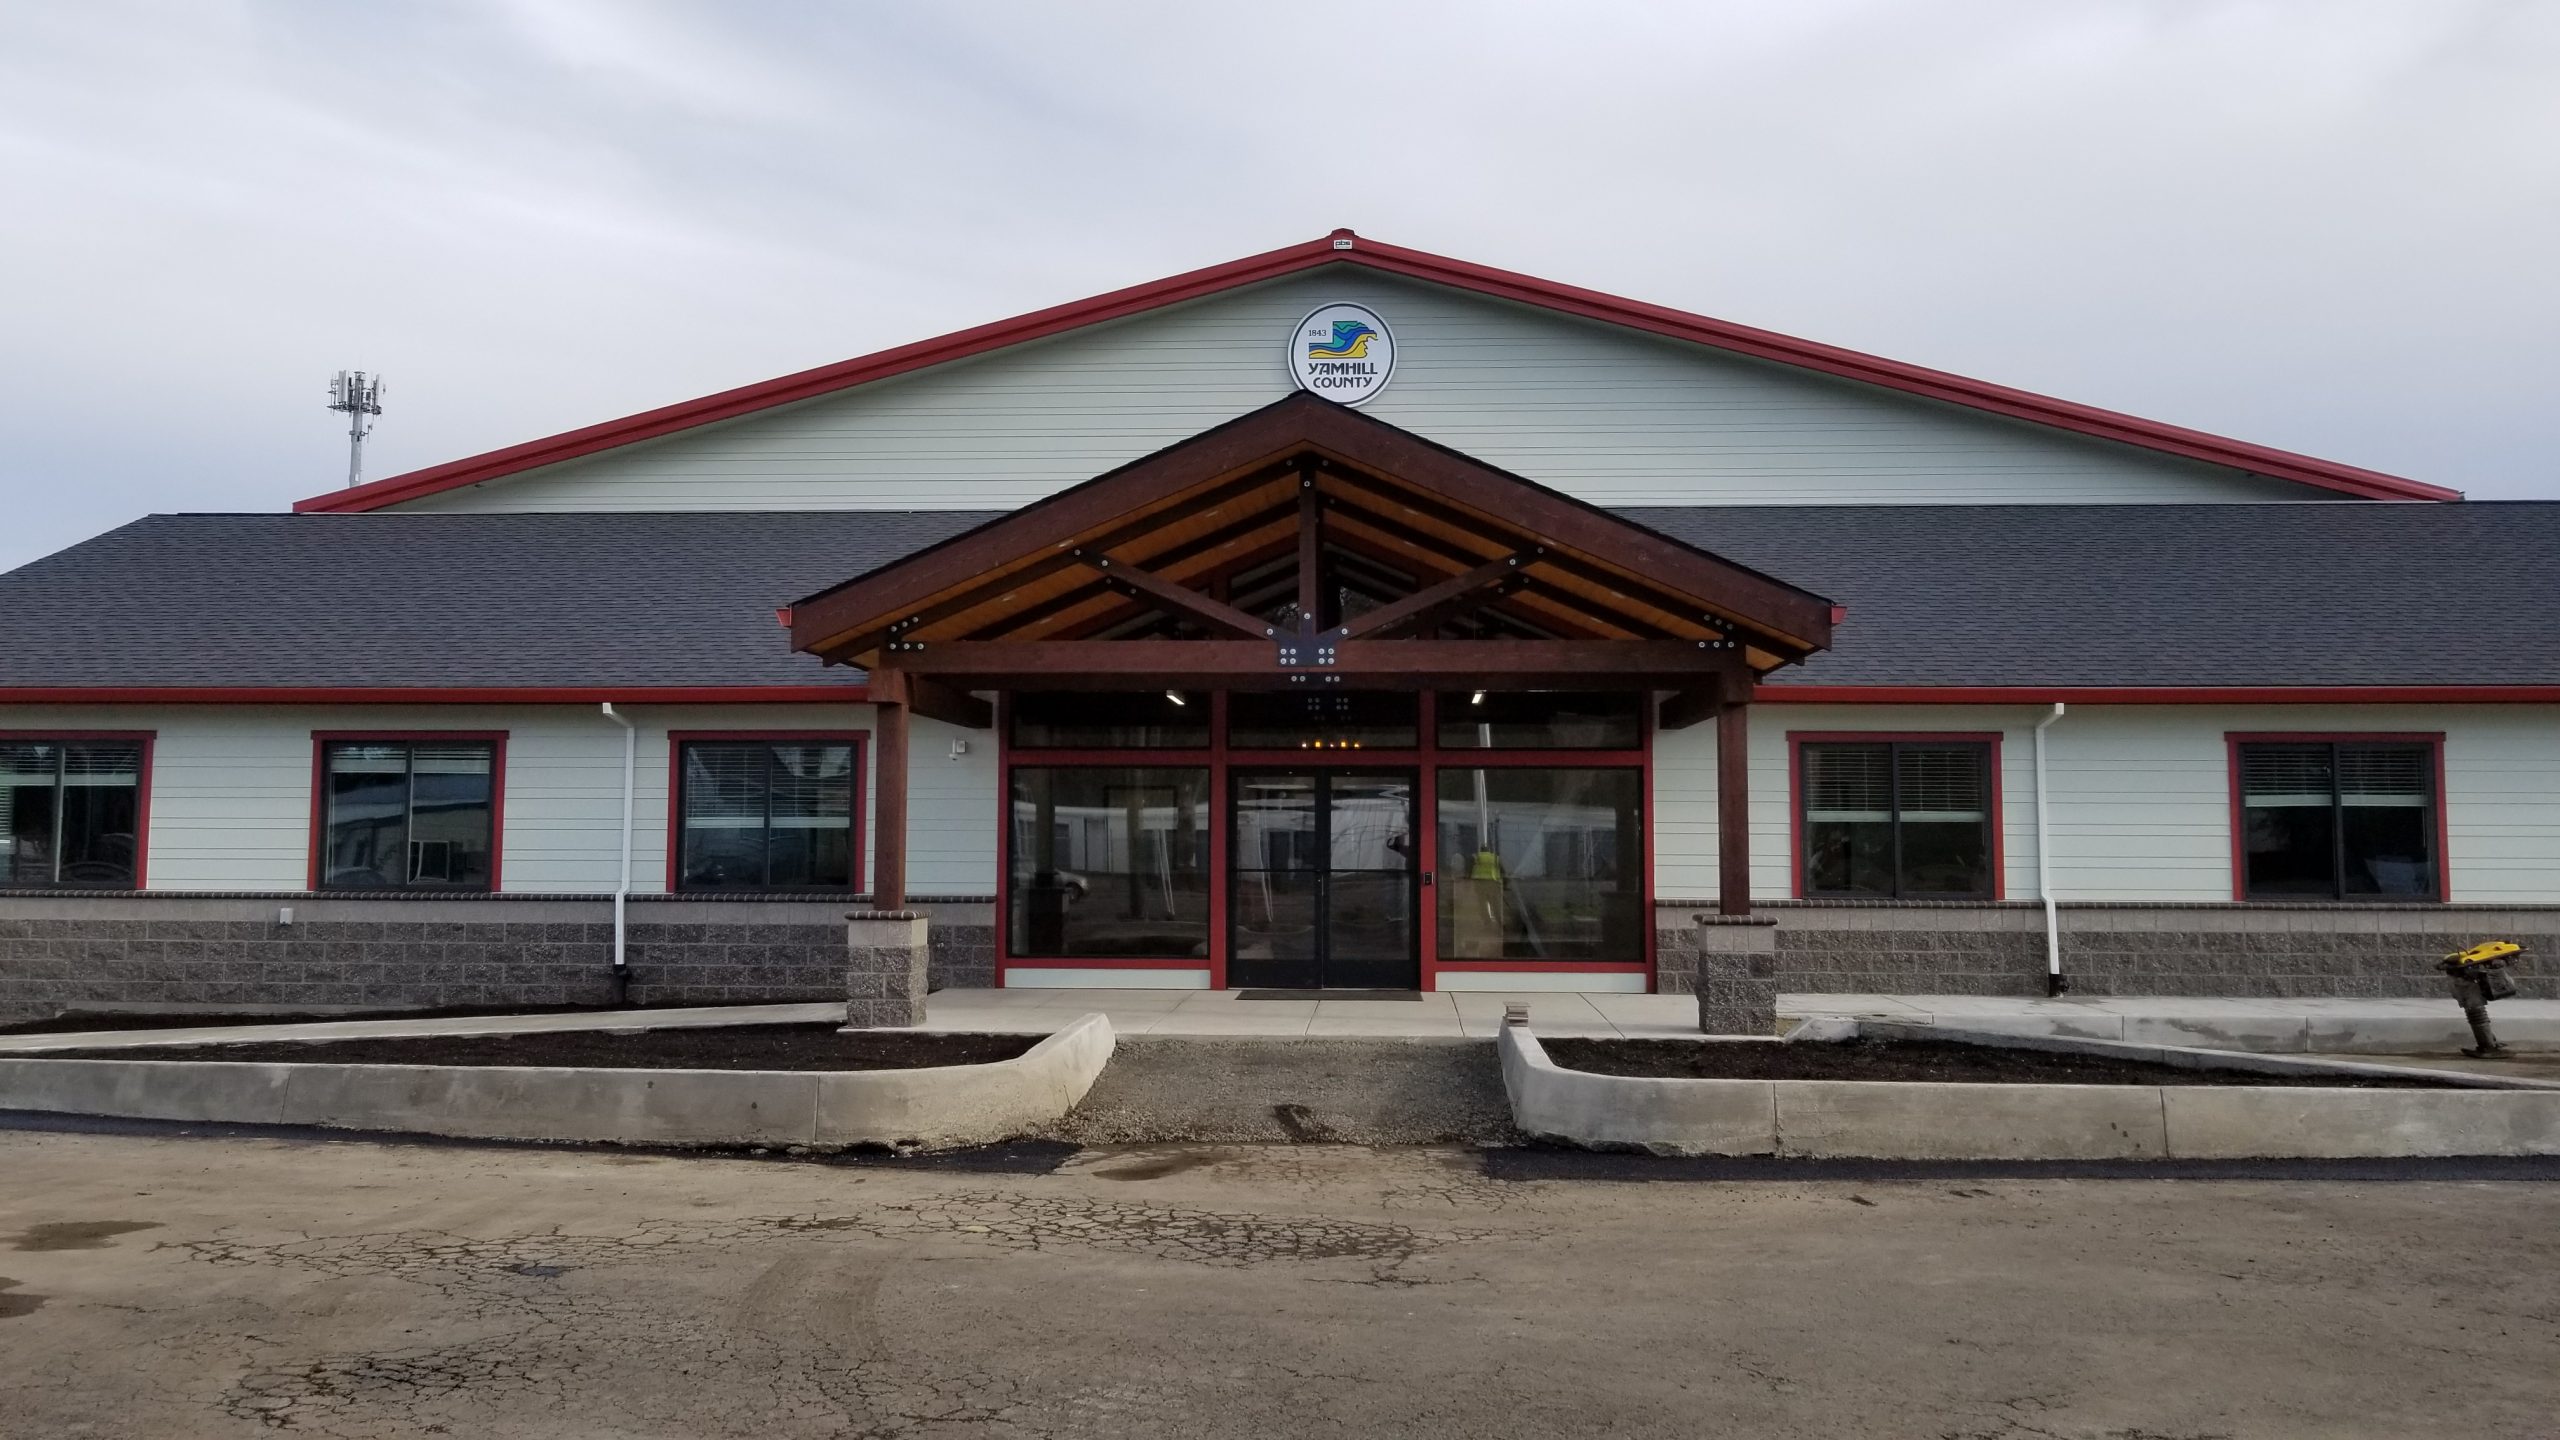 Image shows the new Yamhill County Public Works building, front entrance.